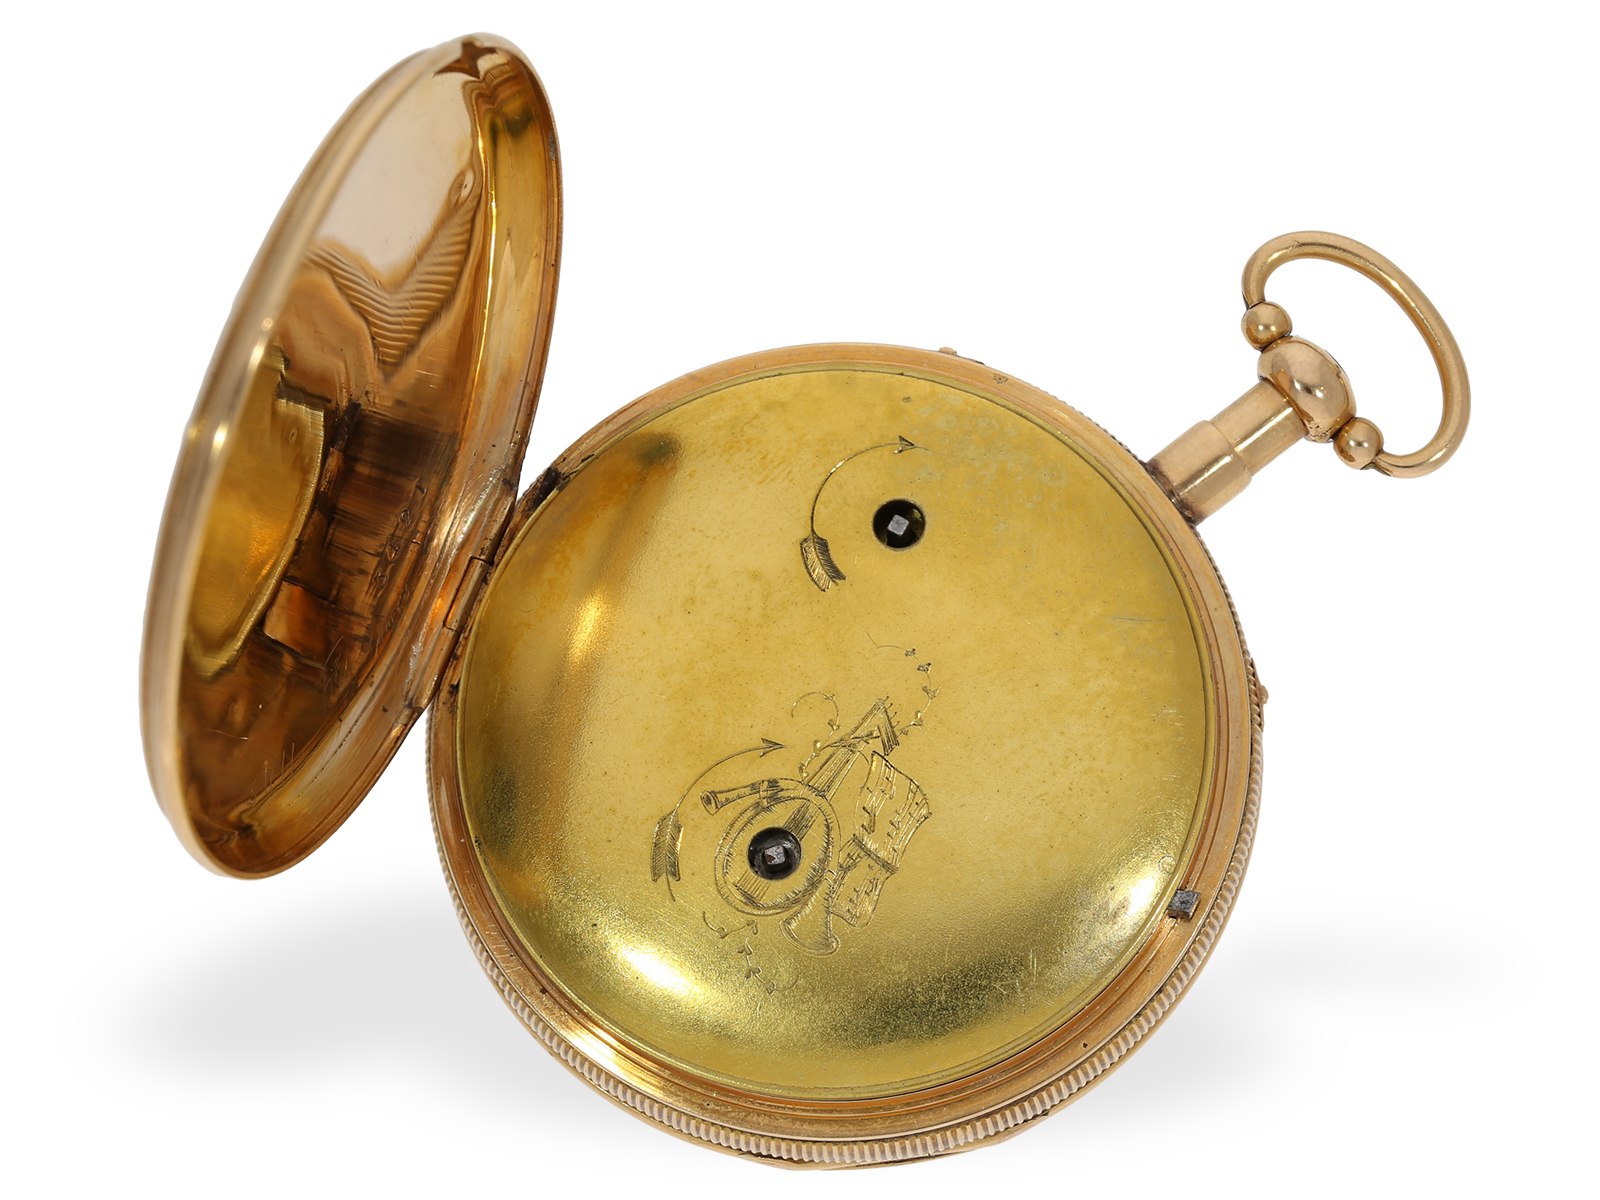 Pocket watch: 18K gold cylinder watch with repeater and musical movement, ca. 1820 - Image 3 of 5